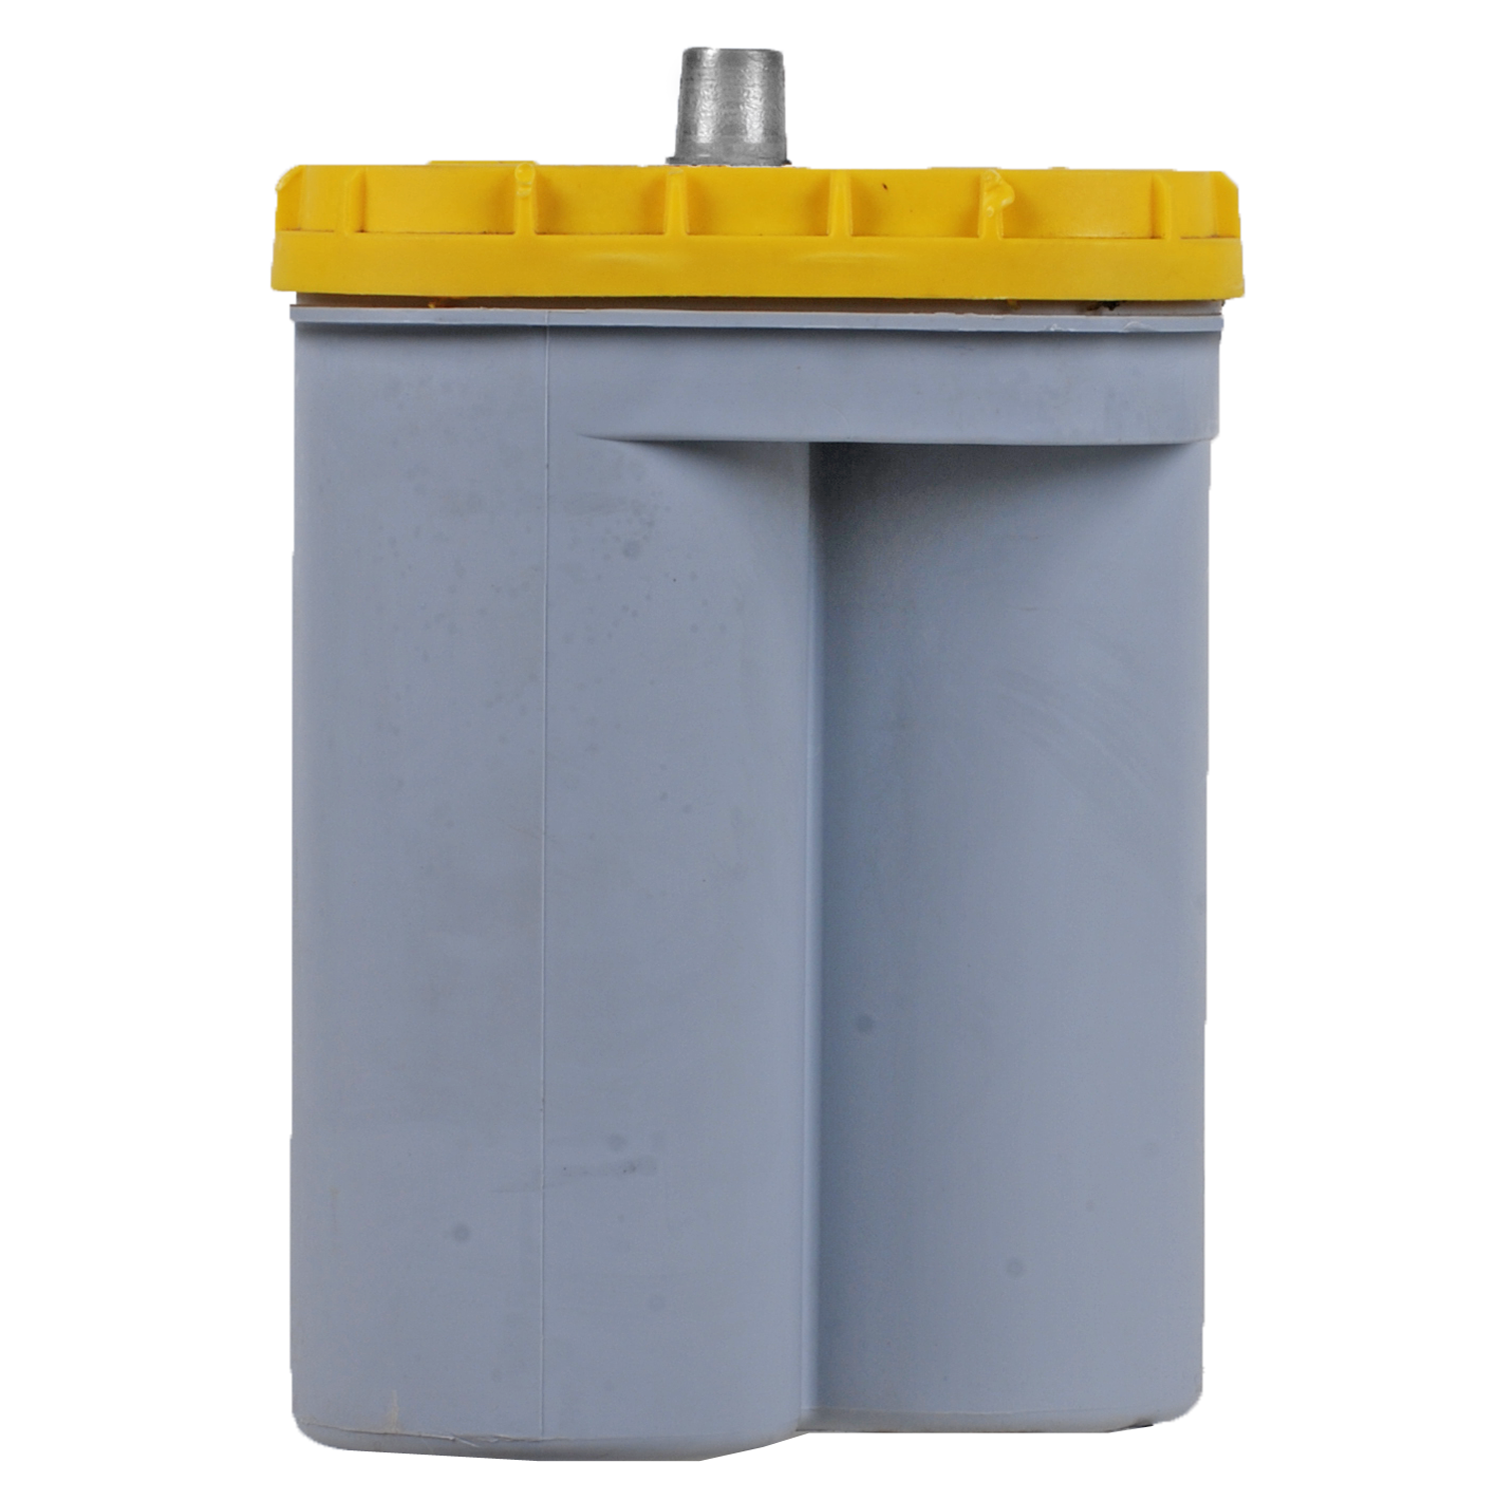 OPTIMA YellowTop AGM Spiralcell Dual Purpose Battery, Group Size D31T, 12 Volt 900 CCA - image 4 of 5